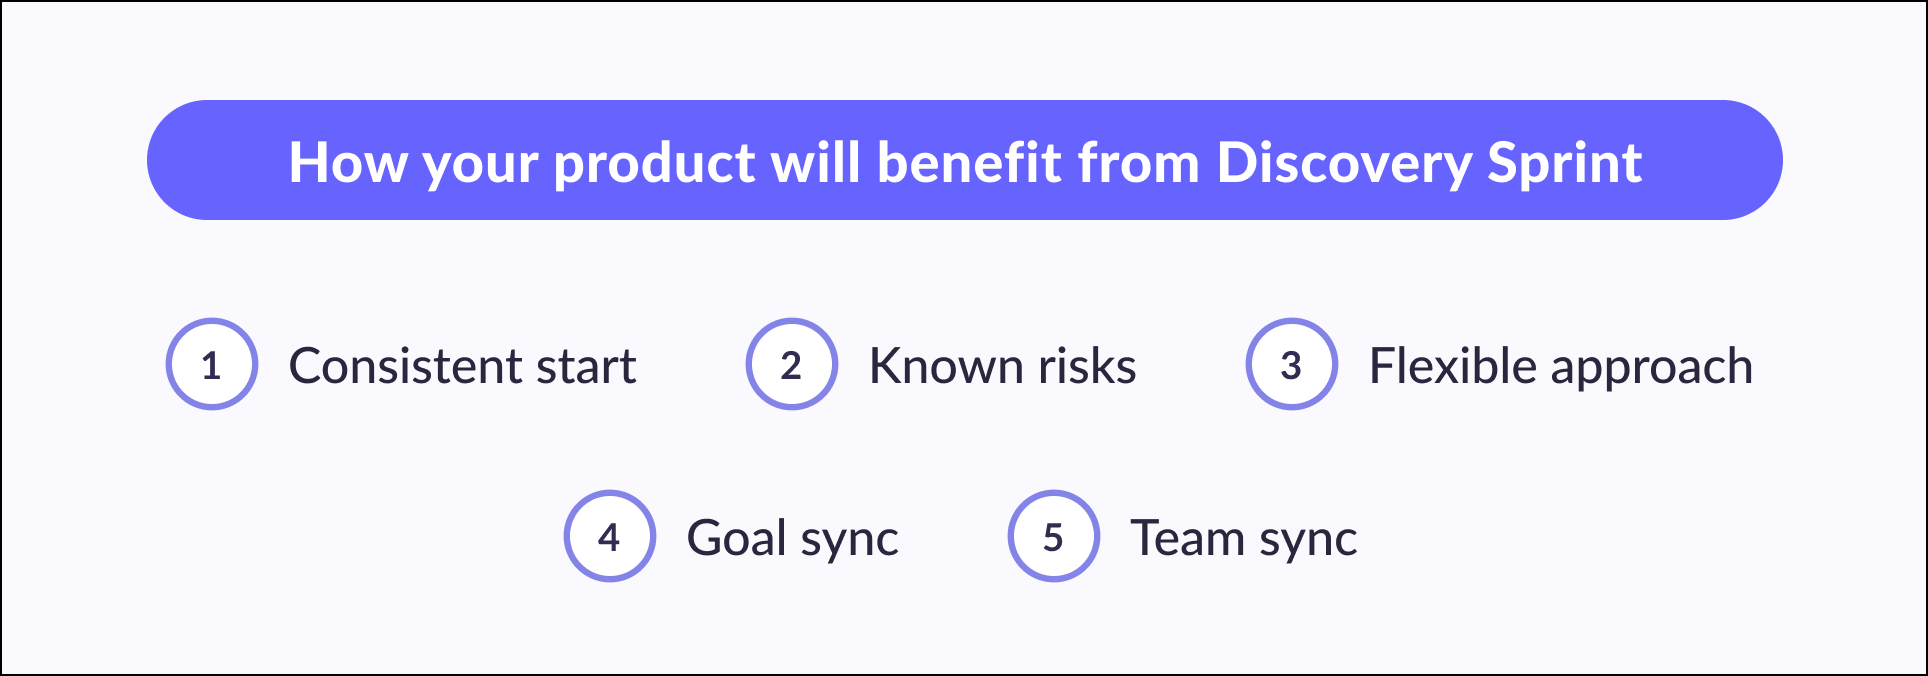 How your product will benefit from Discovery Sprint